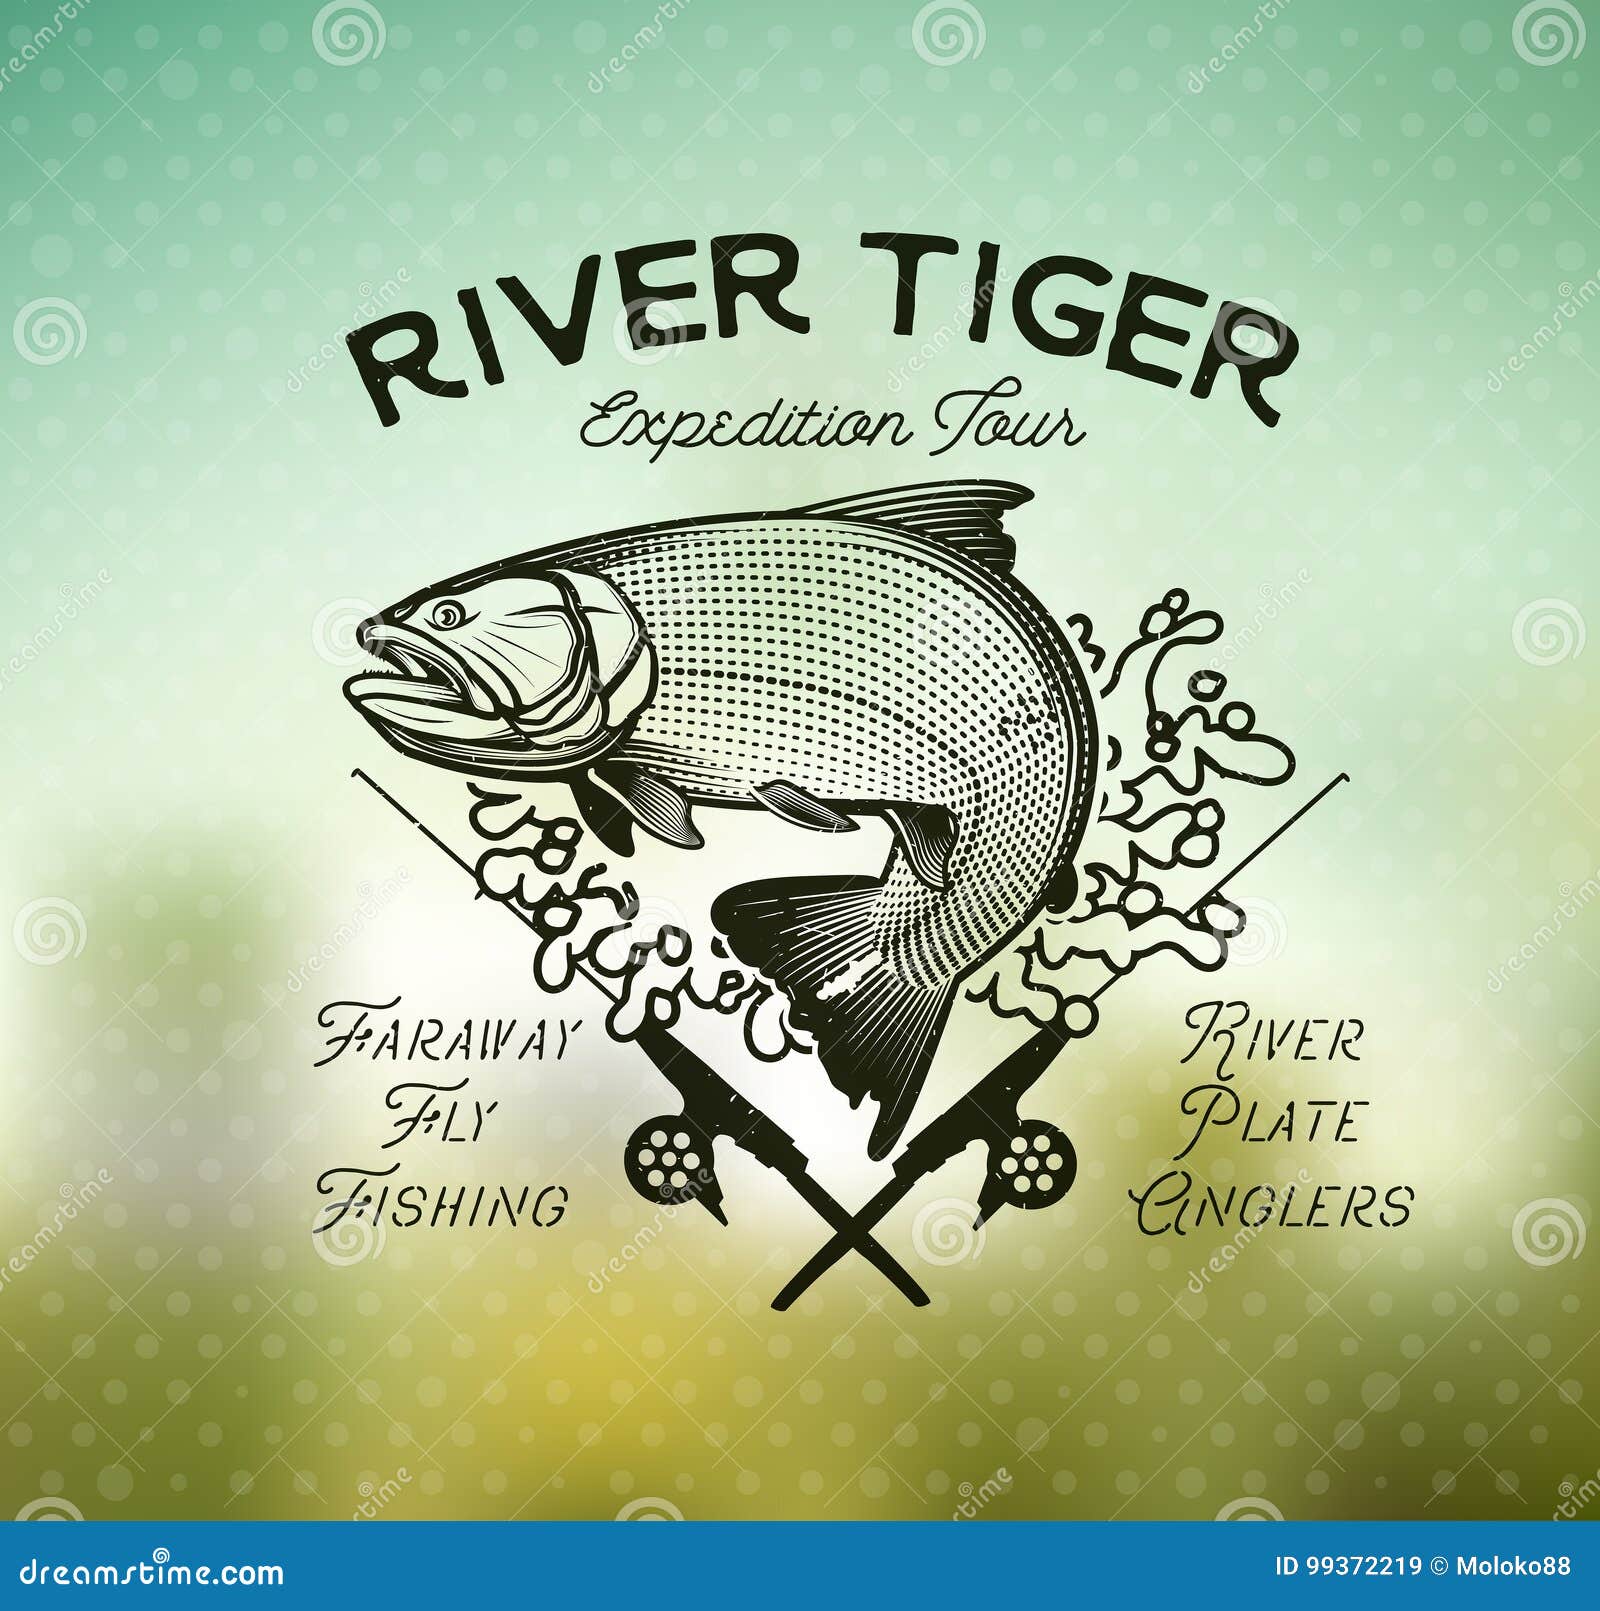 Fly Fishing Badges Stock Illustrations – 13 Fly Fishing Badges Stock  Illustrations, Vectors & Clipart - Dreamstime